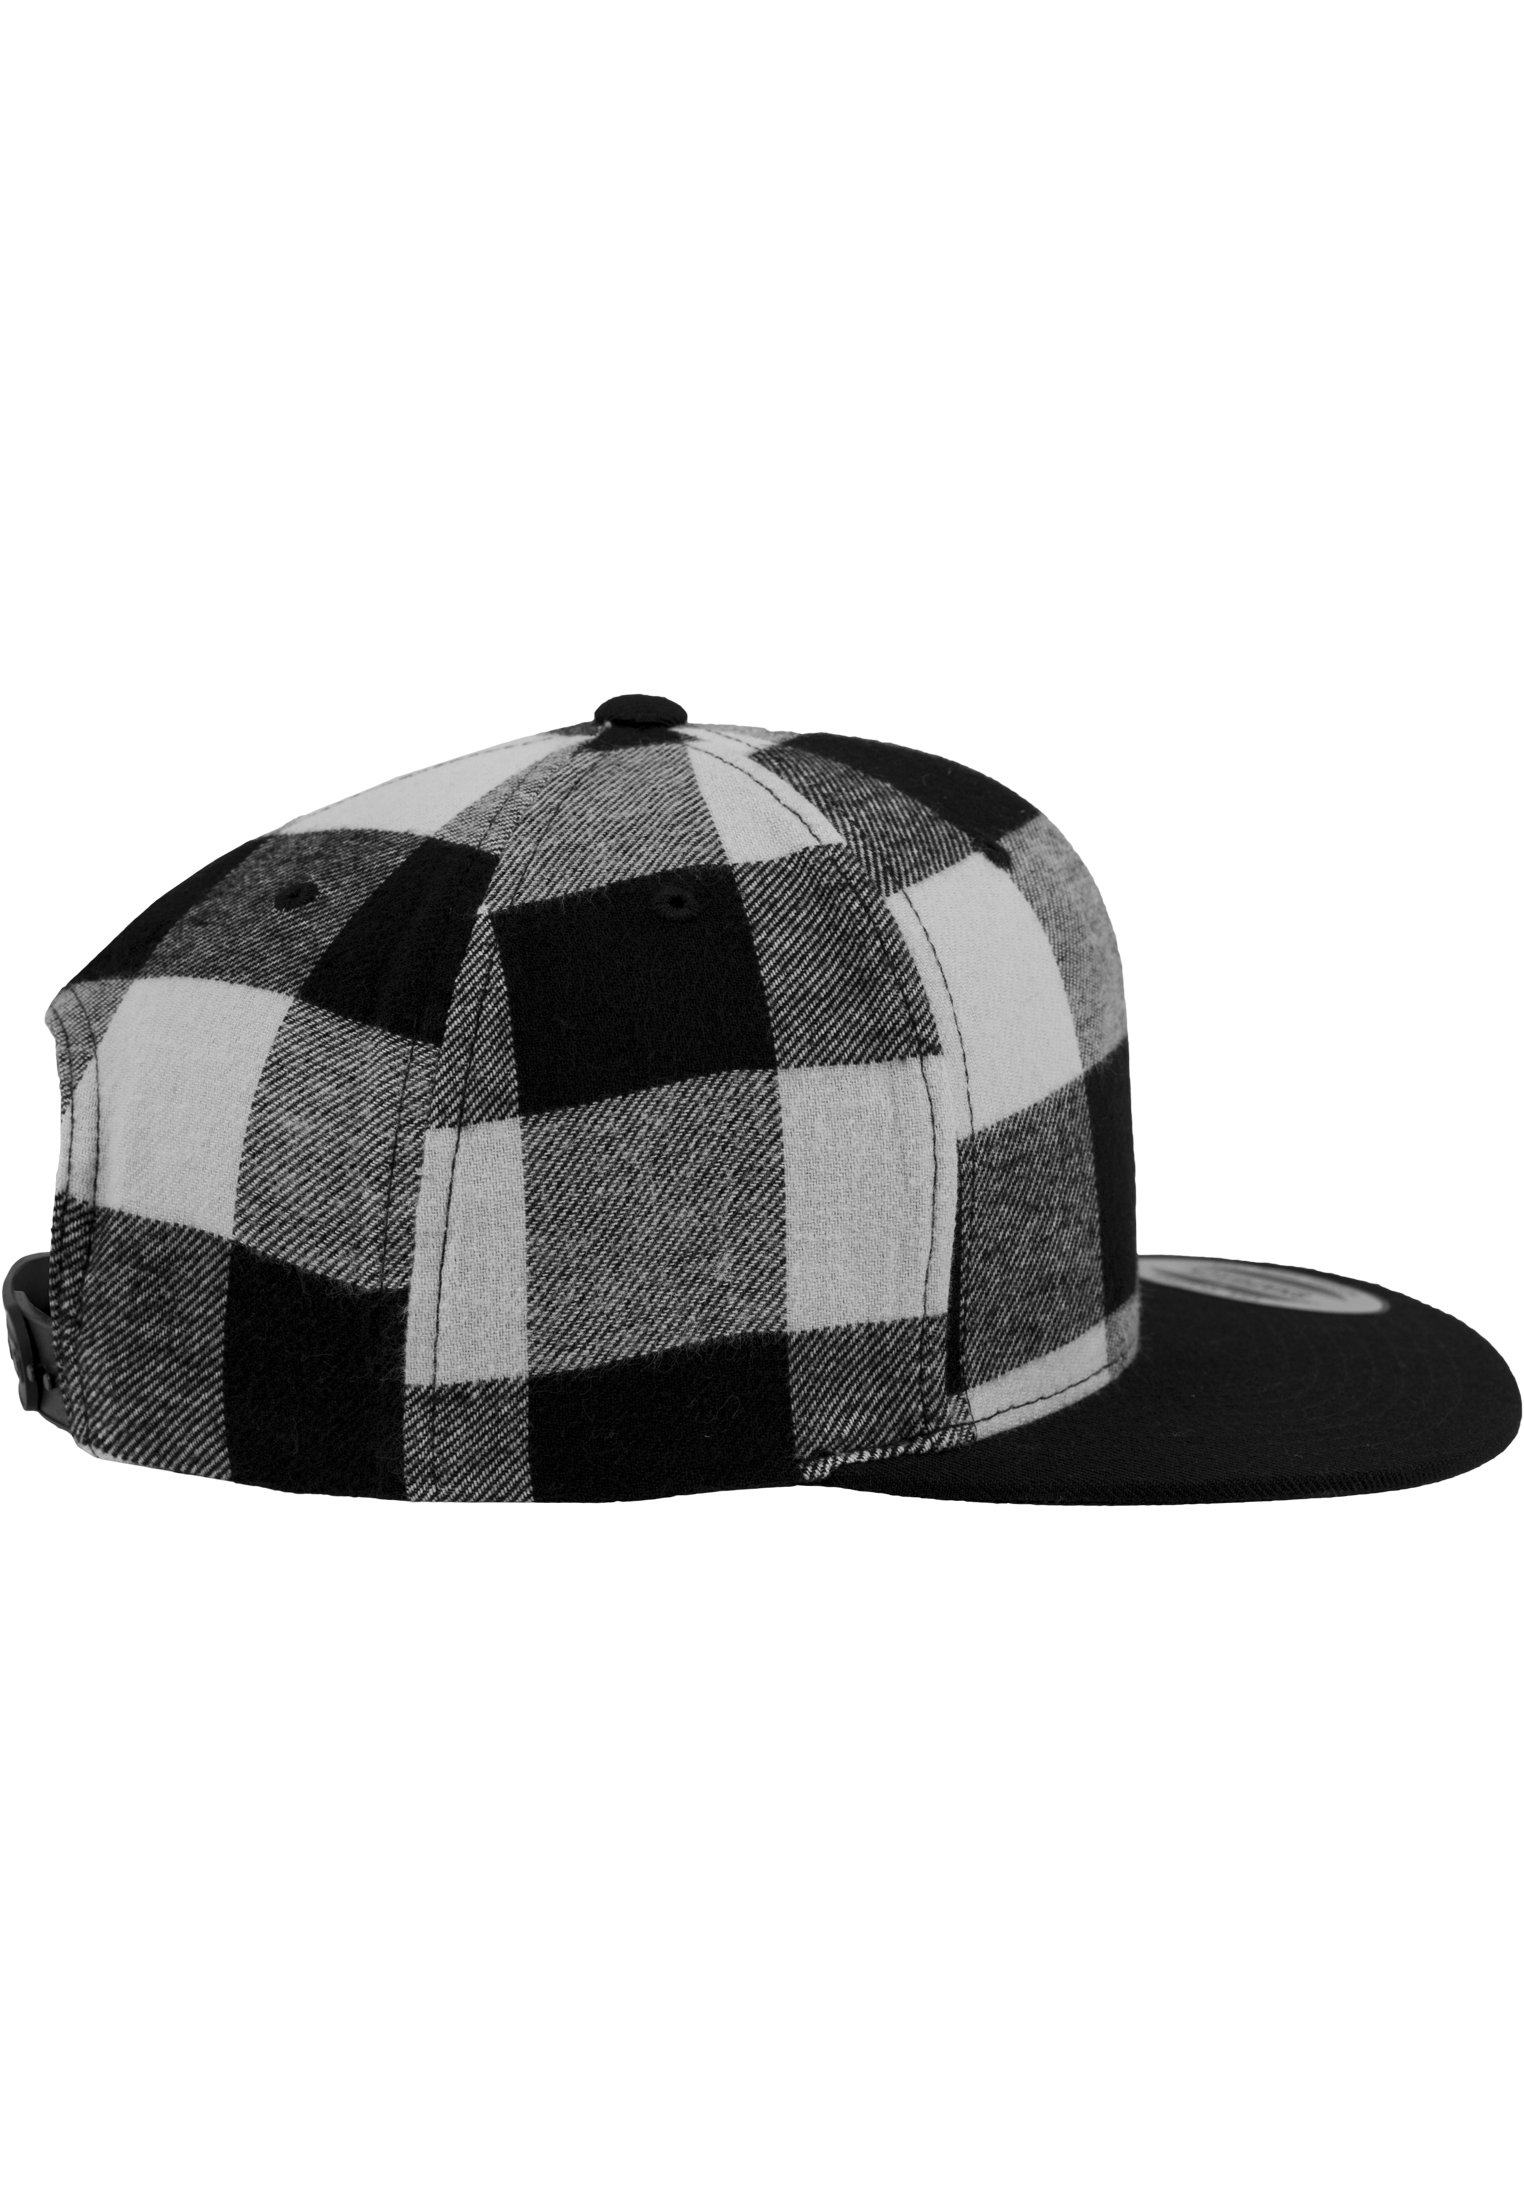 Snapback Checked Flanell Snapback in Farbe blk/wht